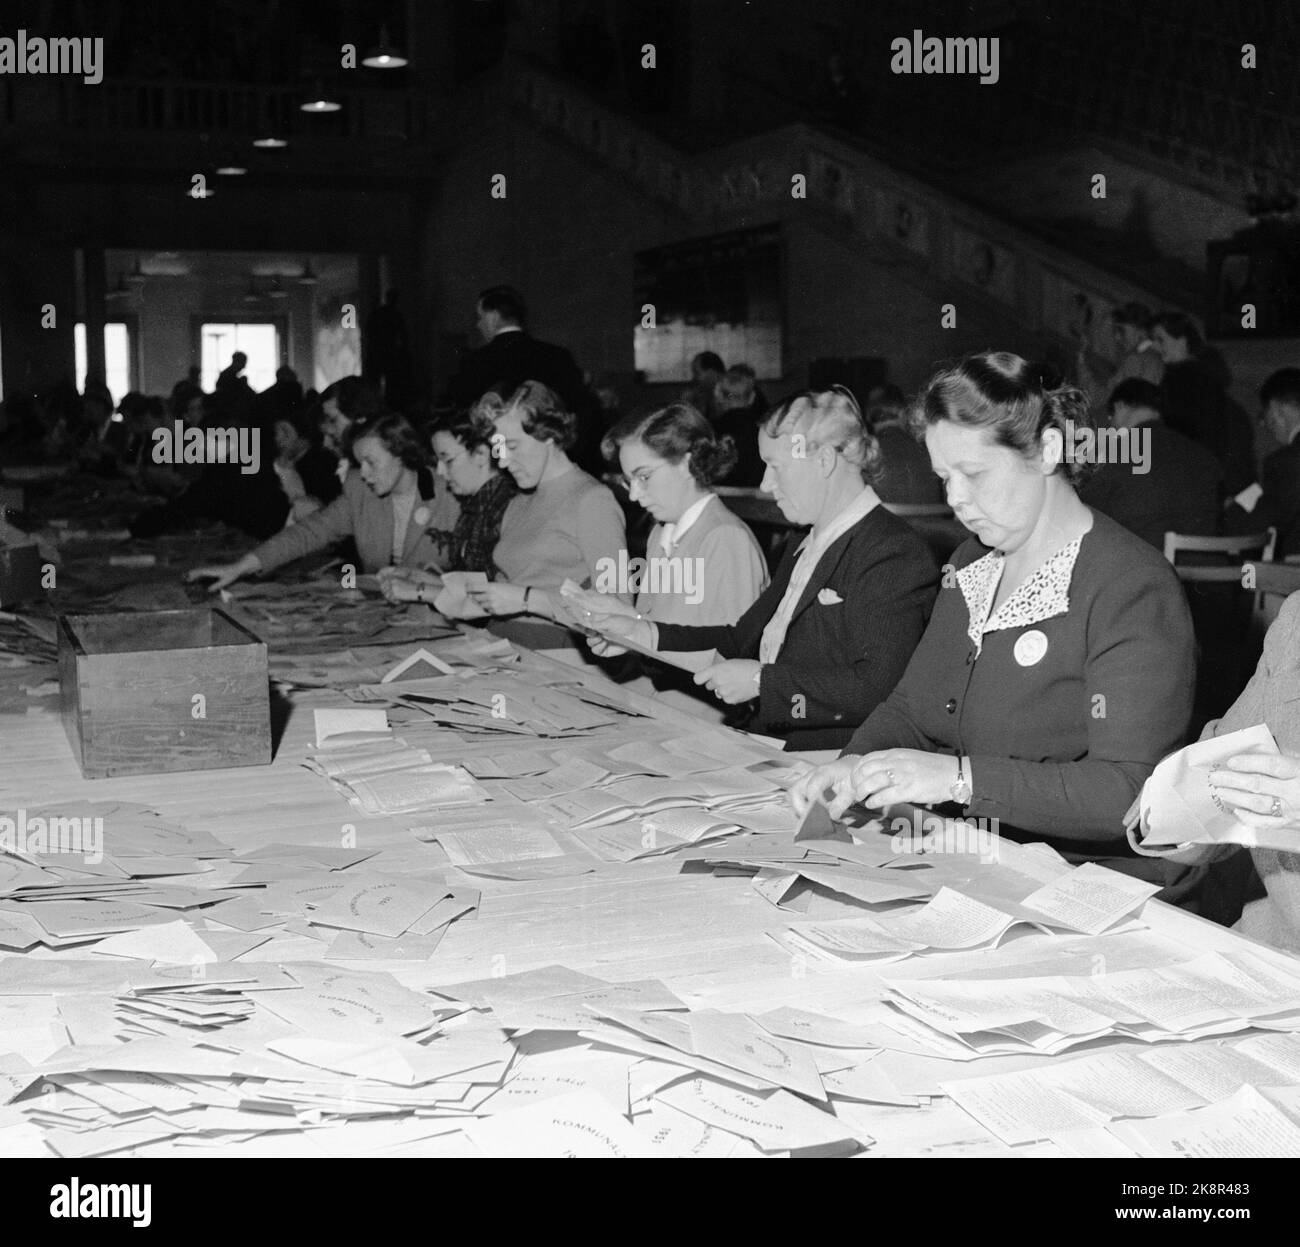 Oslo 19511008 Municipal elections 1951. The voices were counted in the banquet hall in the brand new town hall, where the counting corps sat at long tables and spoke voices. Photo NTB / NTB Stock Photo